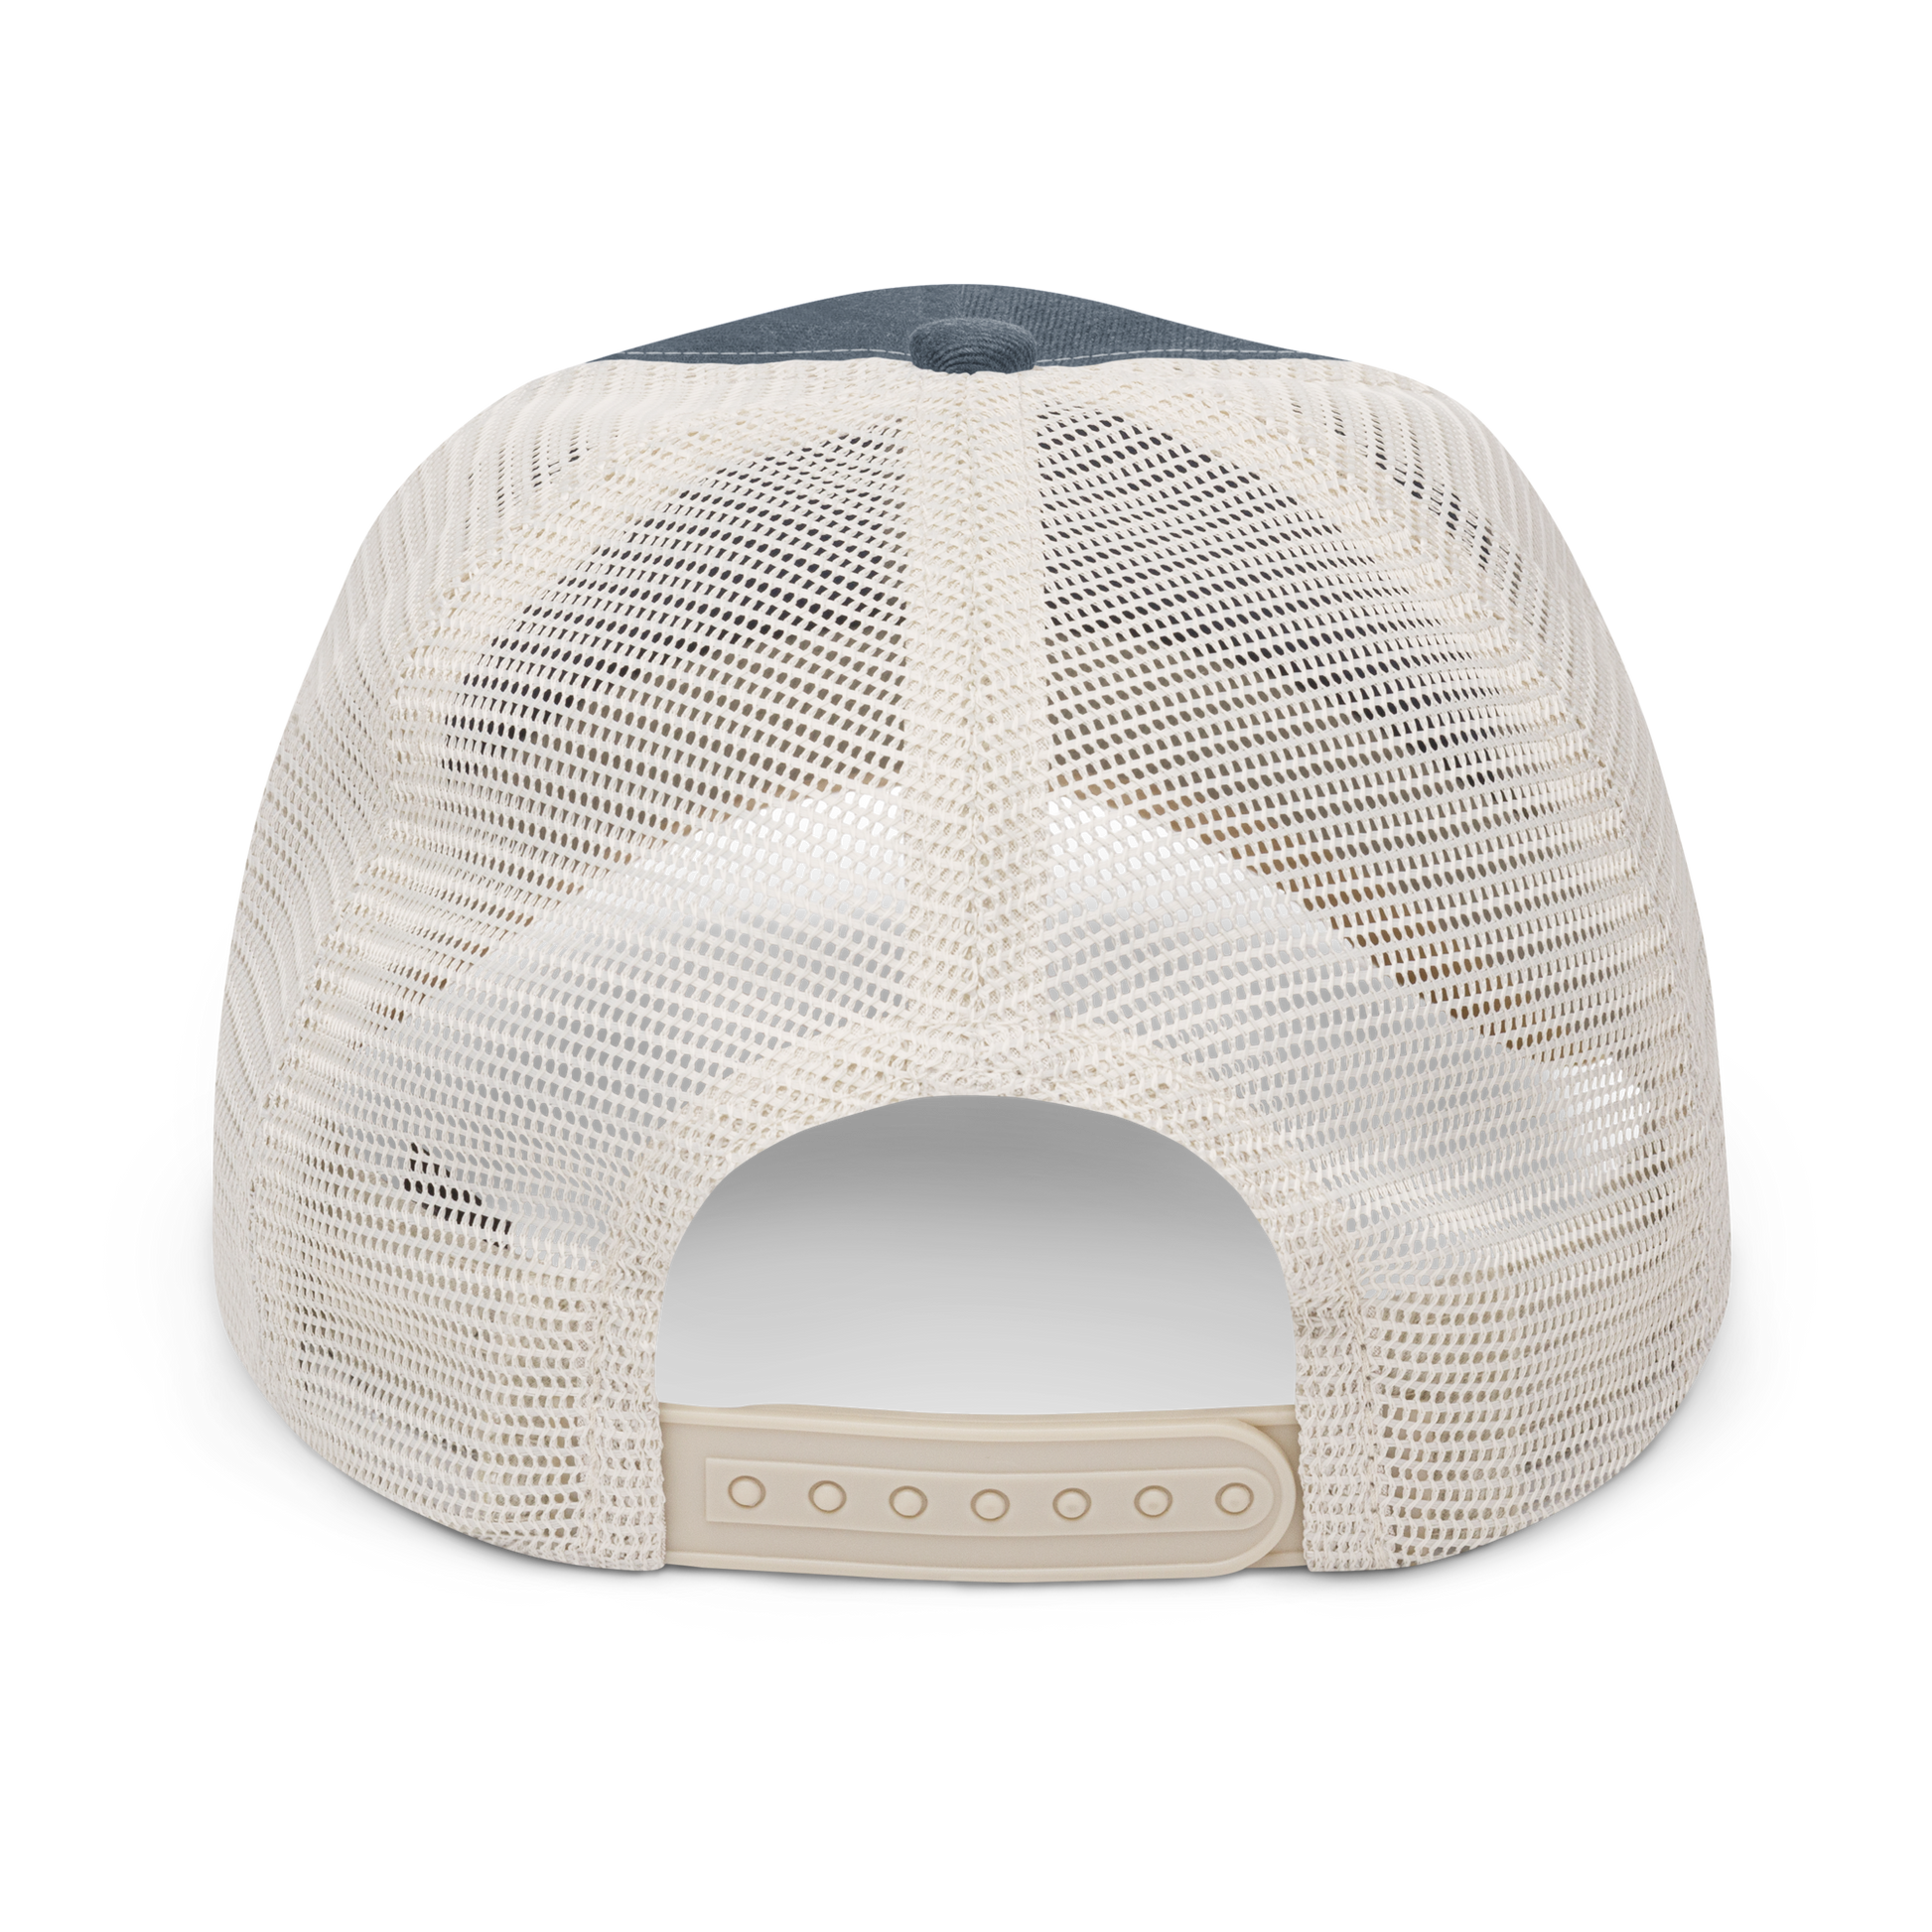 YHM Designs - YQG Windsor Pigment-Dyed Trucker Cap - Crossed-X Design with Airport Code and Vintage Propliner - White Embroidery - Image 08